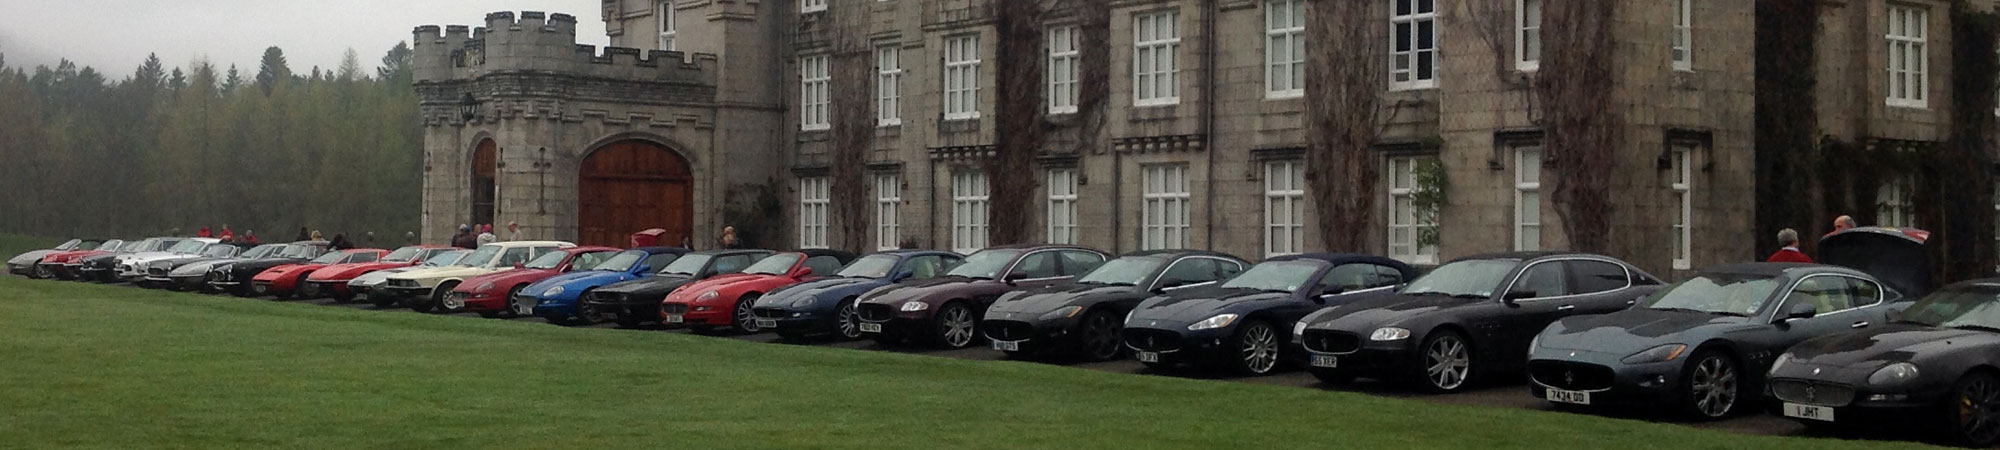 Row of Maserati cars at period building near Manchester